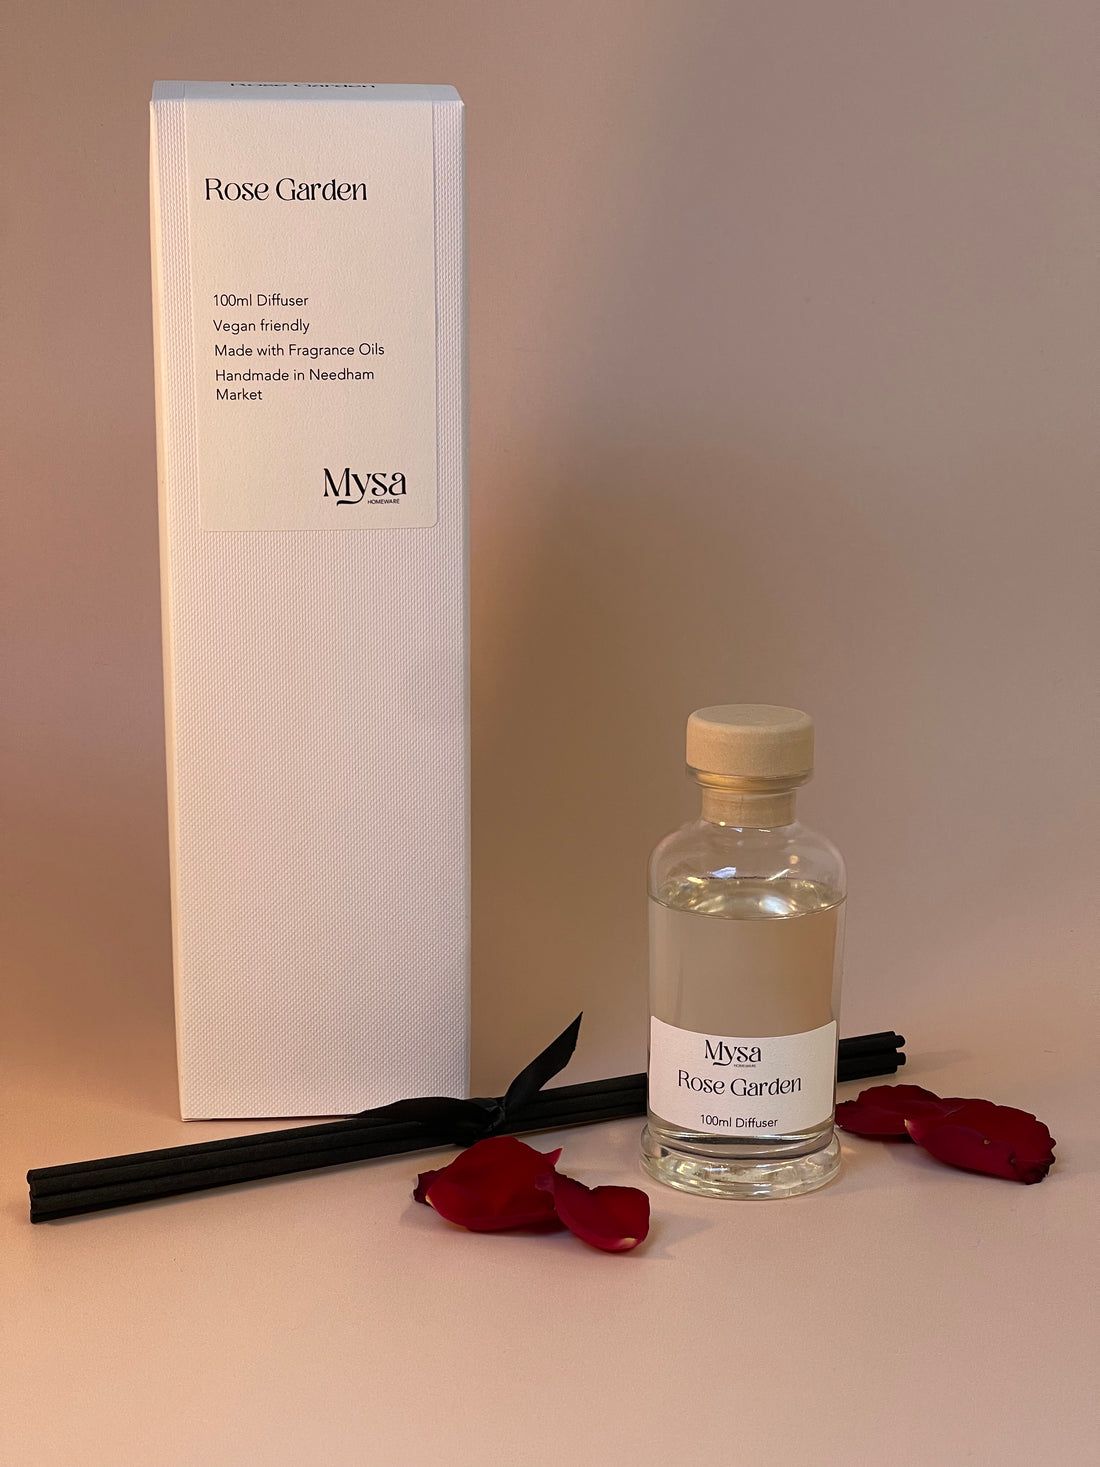 Rose Garden luxury reed diffuser in gift box, featuring a vegan base oil infused with English roses fragrance.